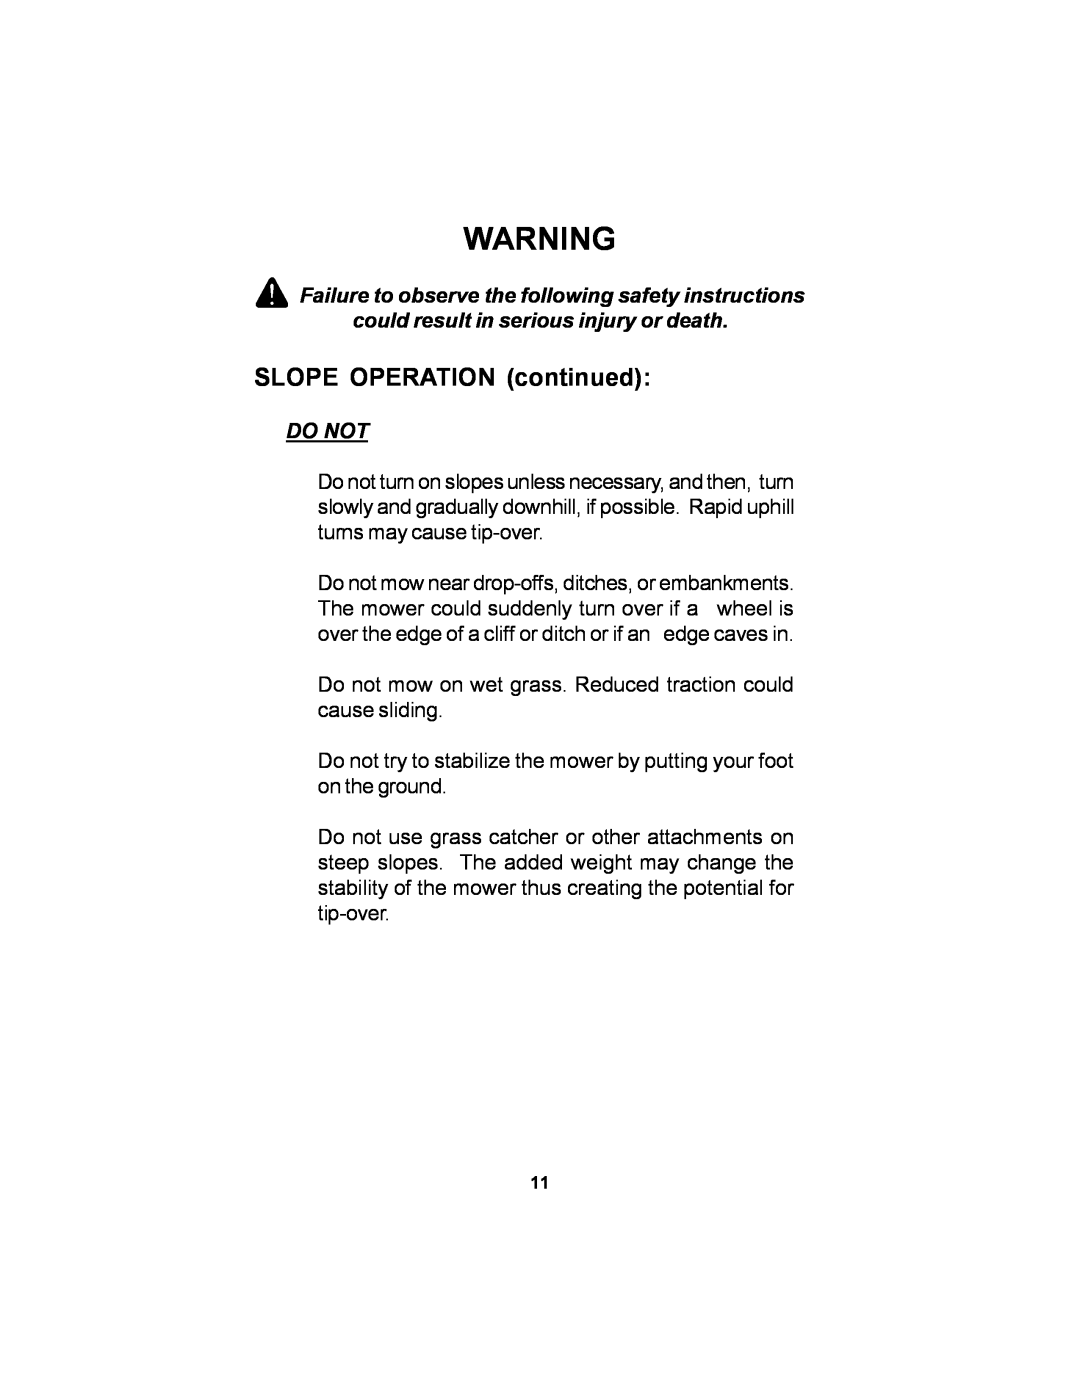 Dixon 11249-106 manual SLOPE OPERATION continued, Do Not 